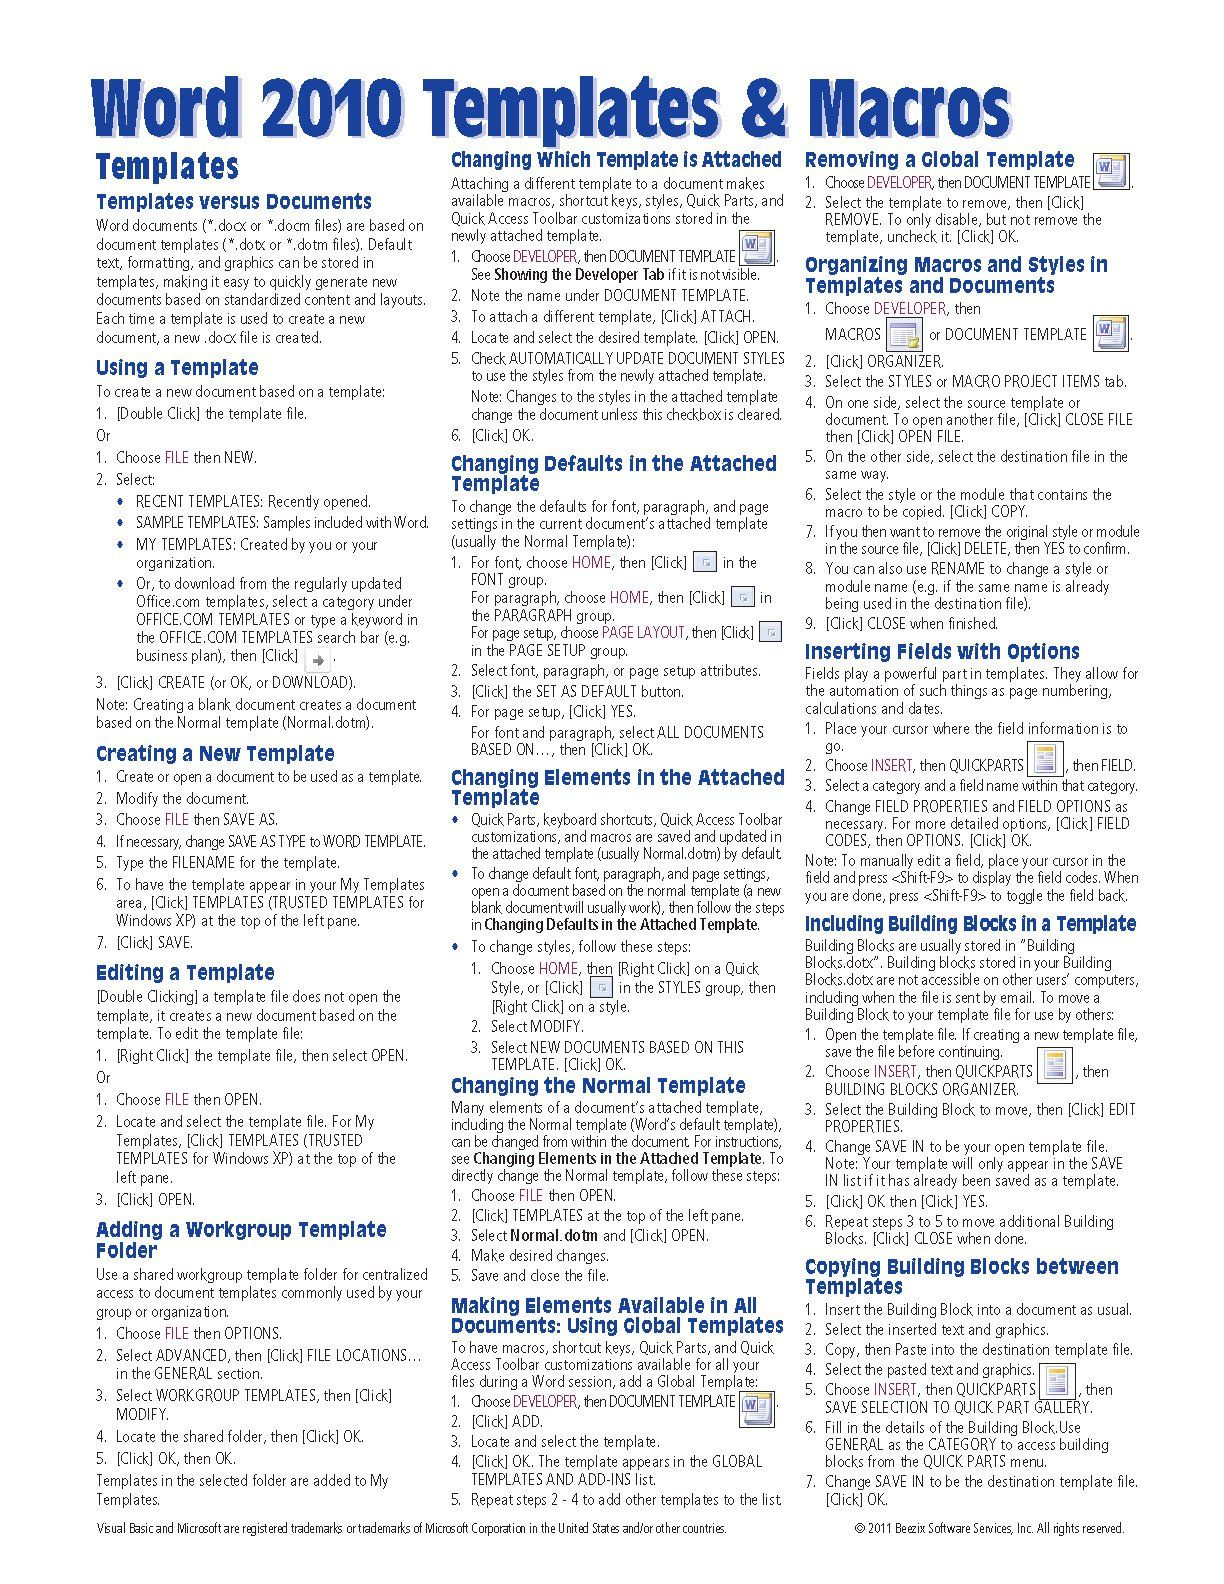 Microsoft Word 2010 Templates & Macros Quick Reference Guide For Cheat Sheet Template Word